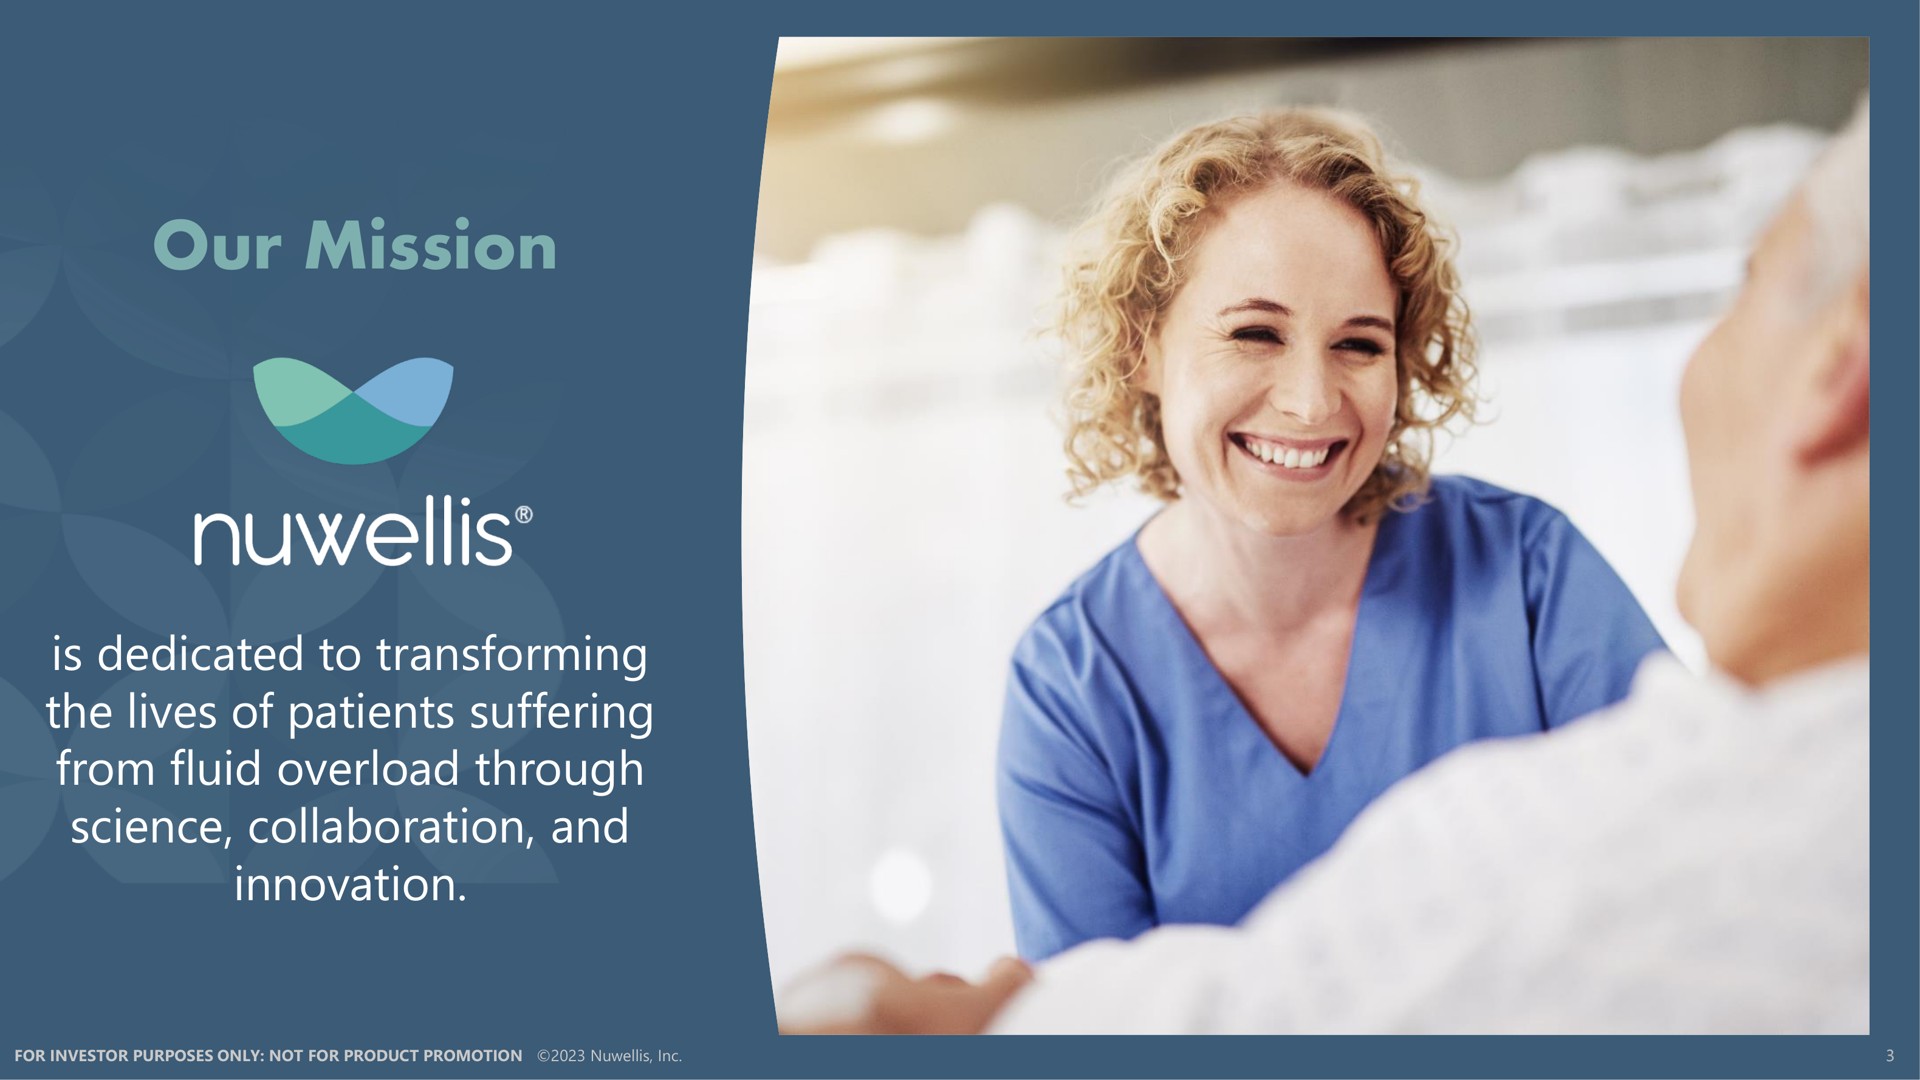 our mission is dedicated to transforming the lives of patients suffering from fluid overload through science collaboration and innovation | Nuwellis